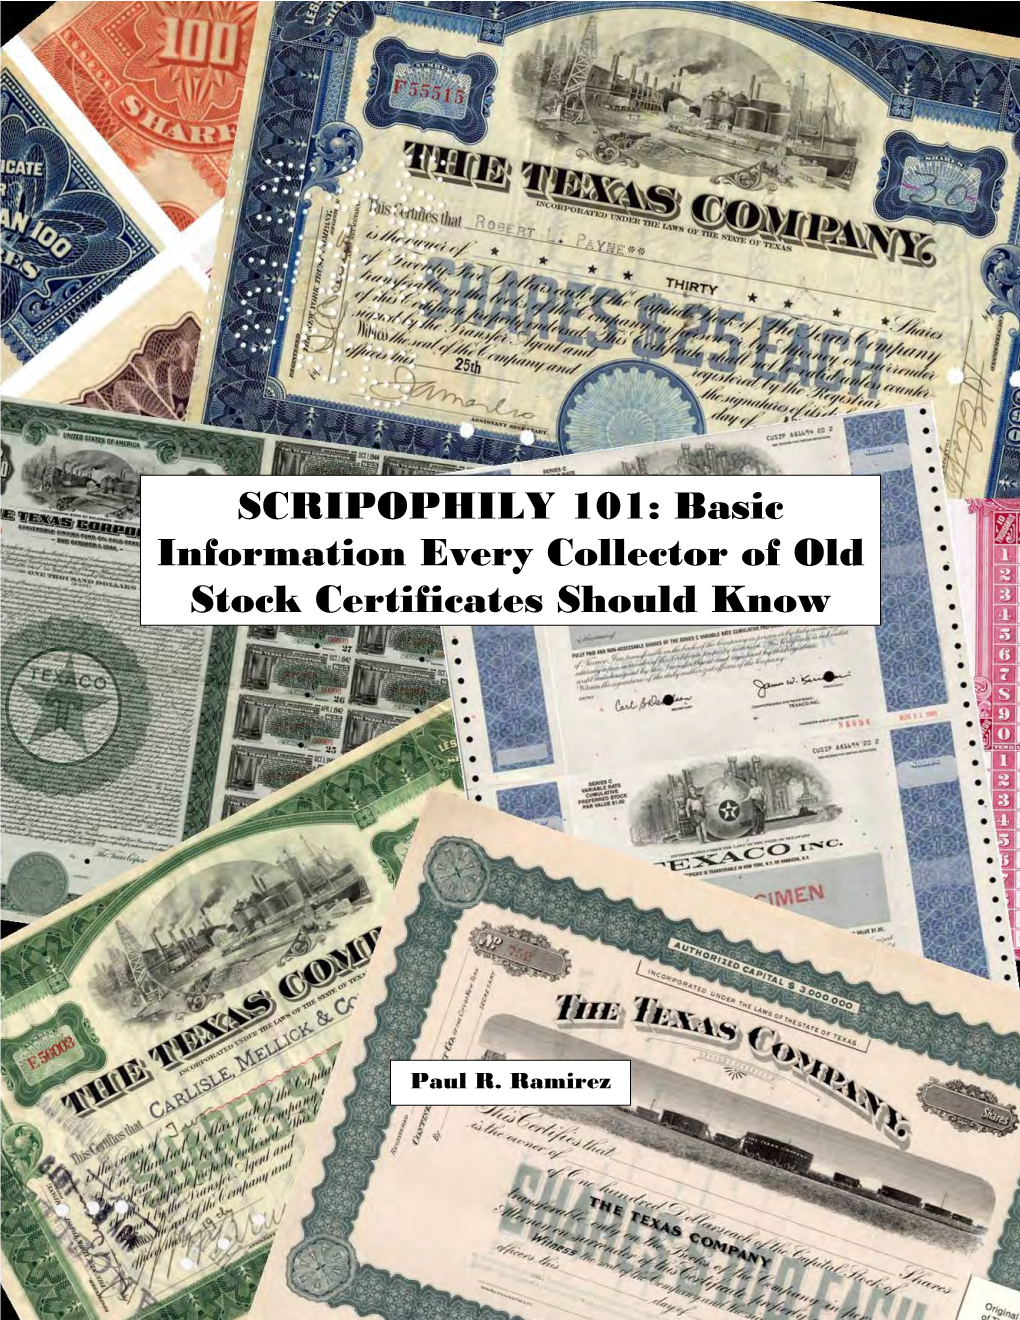 SCRIPOPHILY 101: Basic Information Every Collector of Old Stock Certificates Should Know